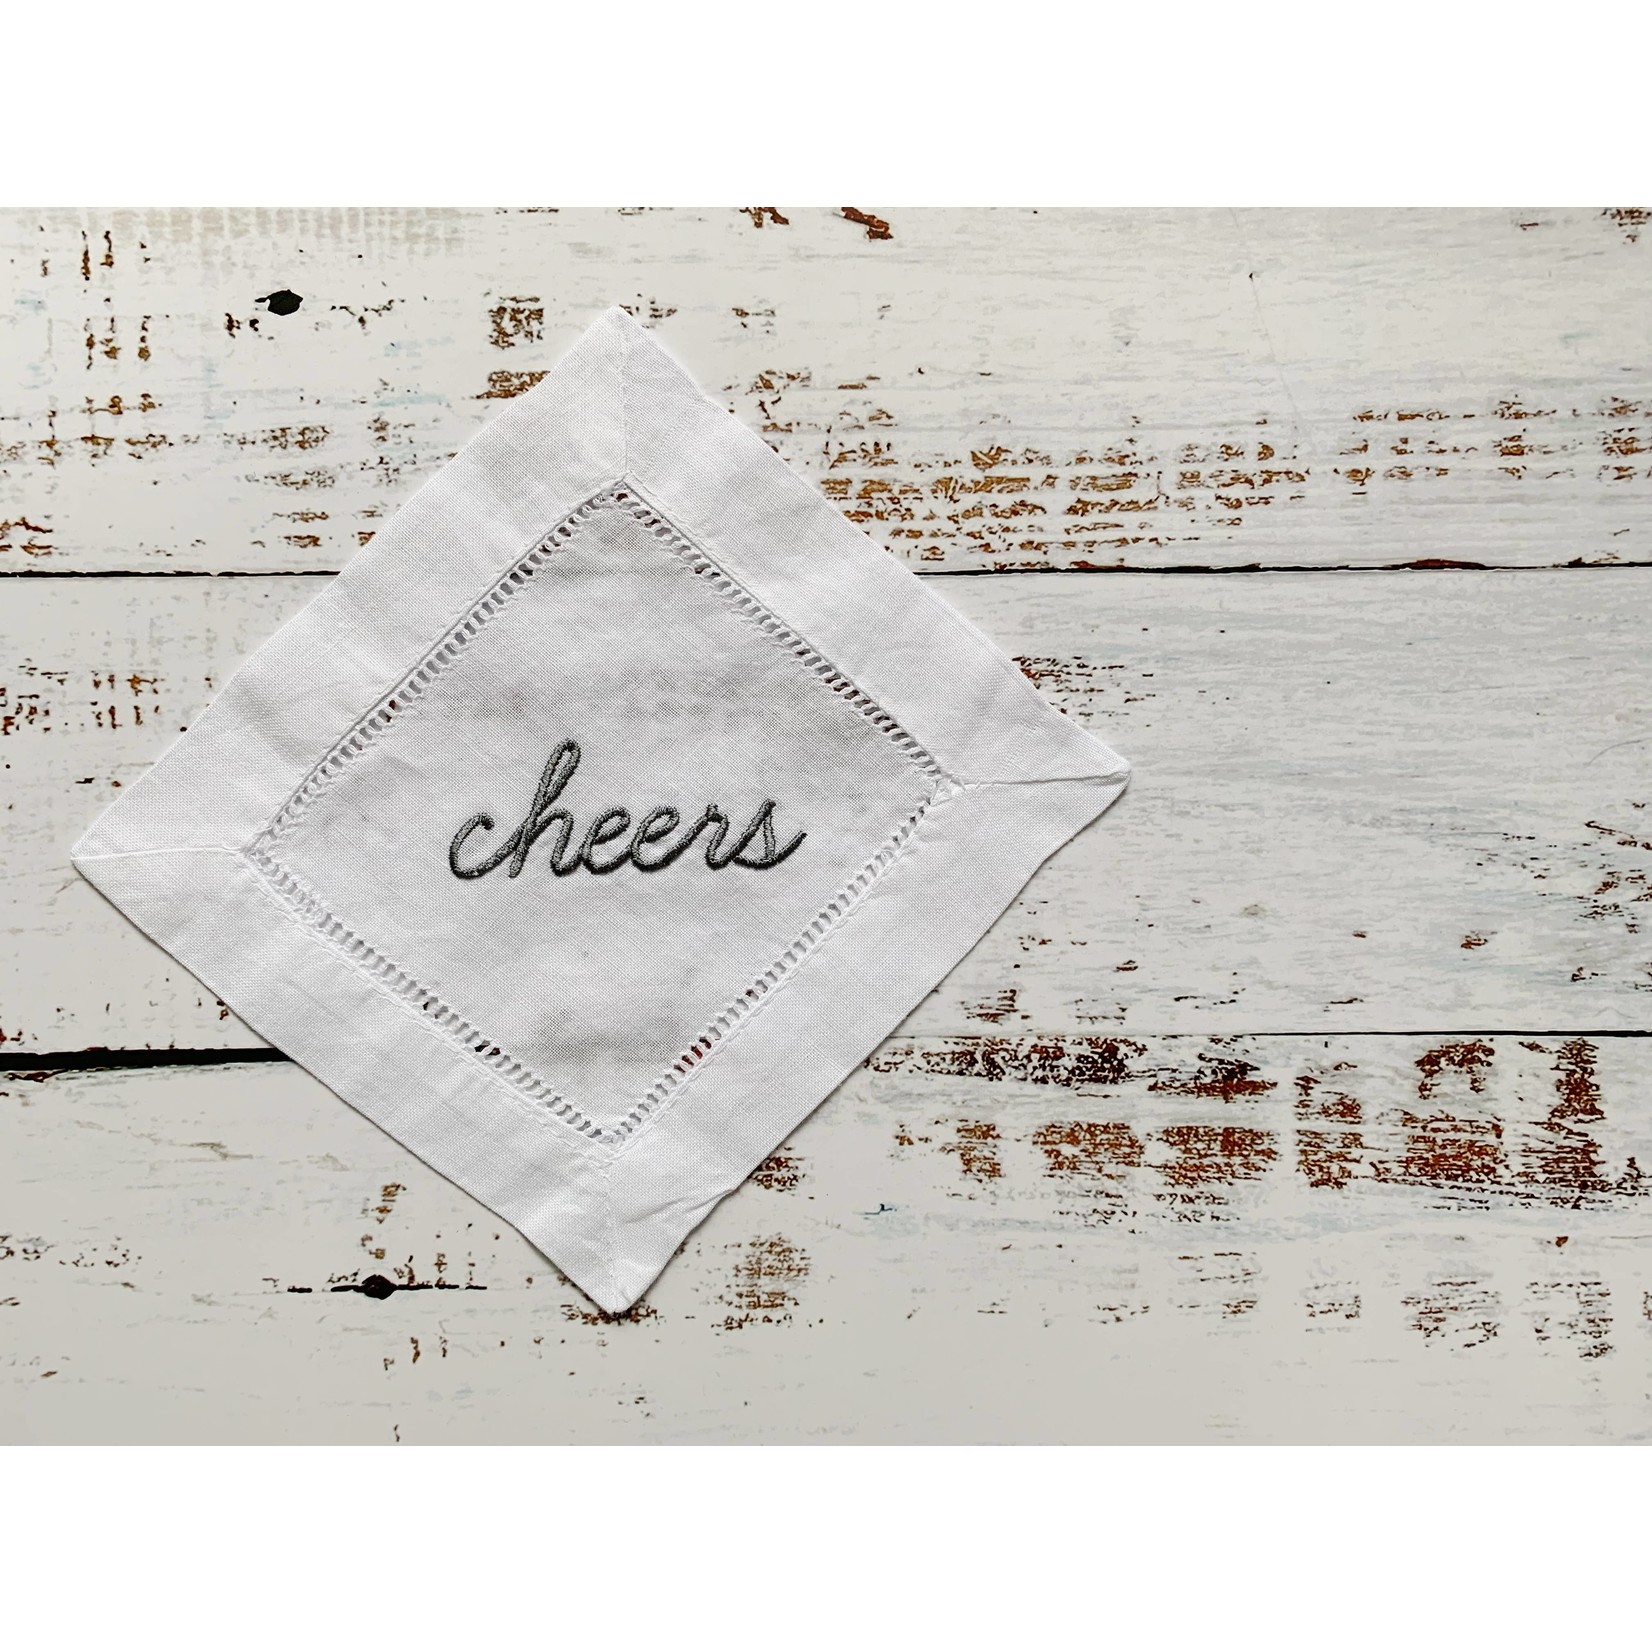 Dot and Army Cheers! Cocktail Napkins (Set of 4)